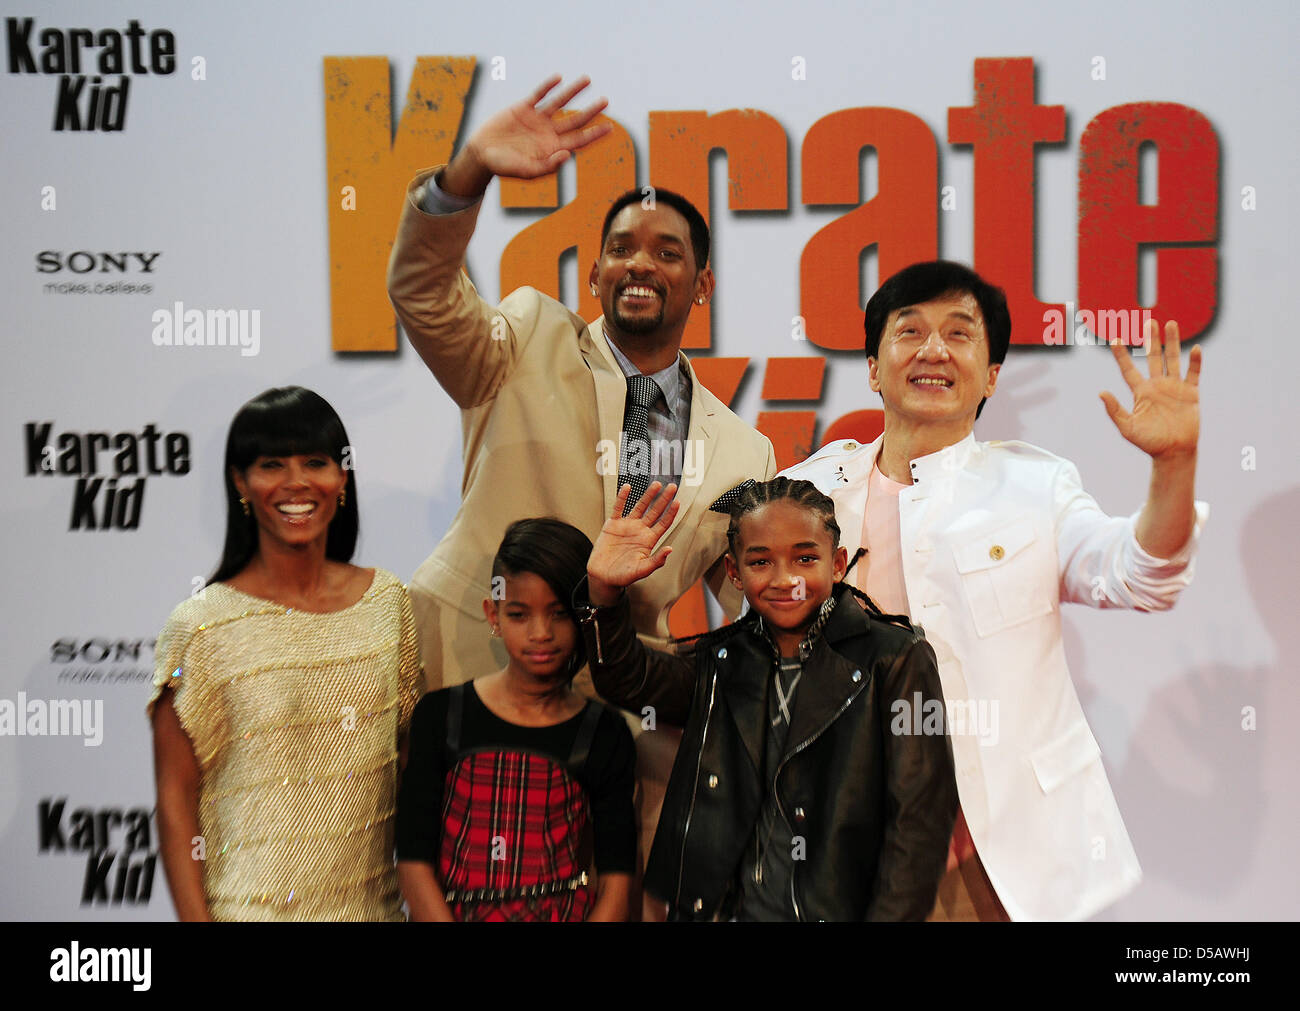 American actor Will Smith (L), his wife Jada Pinkett (front L-R), his daughter Willow, son Jaden and Hong Kong-born actor Jackie Chan pose on the red carpet at the premier of 'Karate Kid' in Berlin, Germany, 19 July 2010. The film will be shown in German cinemas starting 22 July 2010. Photo: Hannibal Hanschke Stock Photo